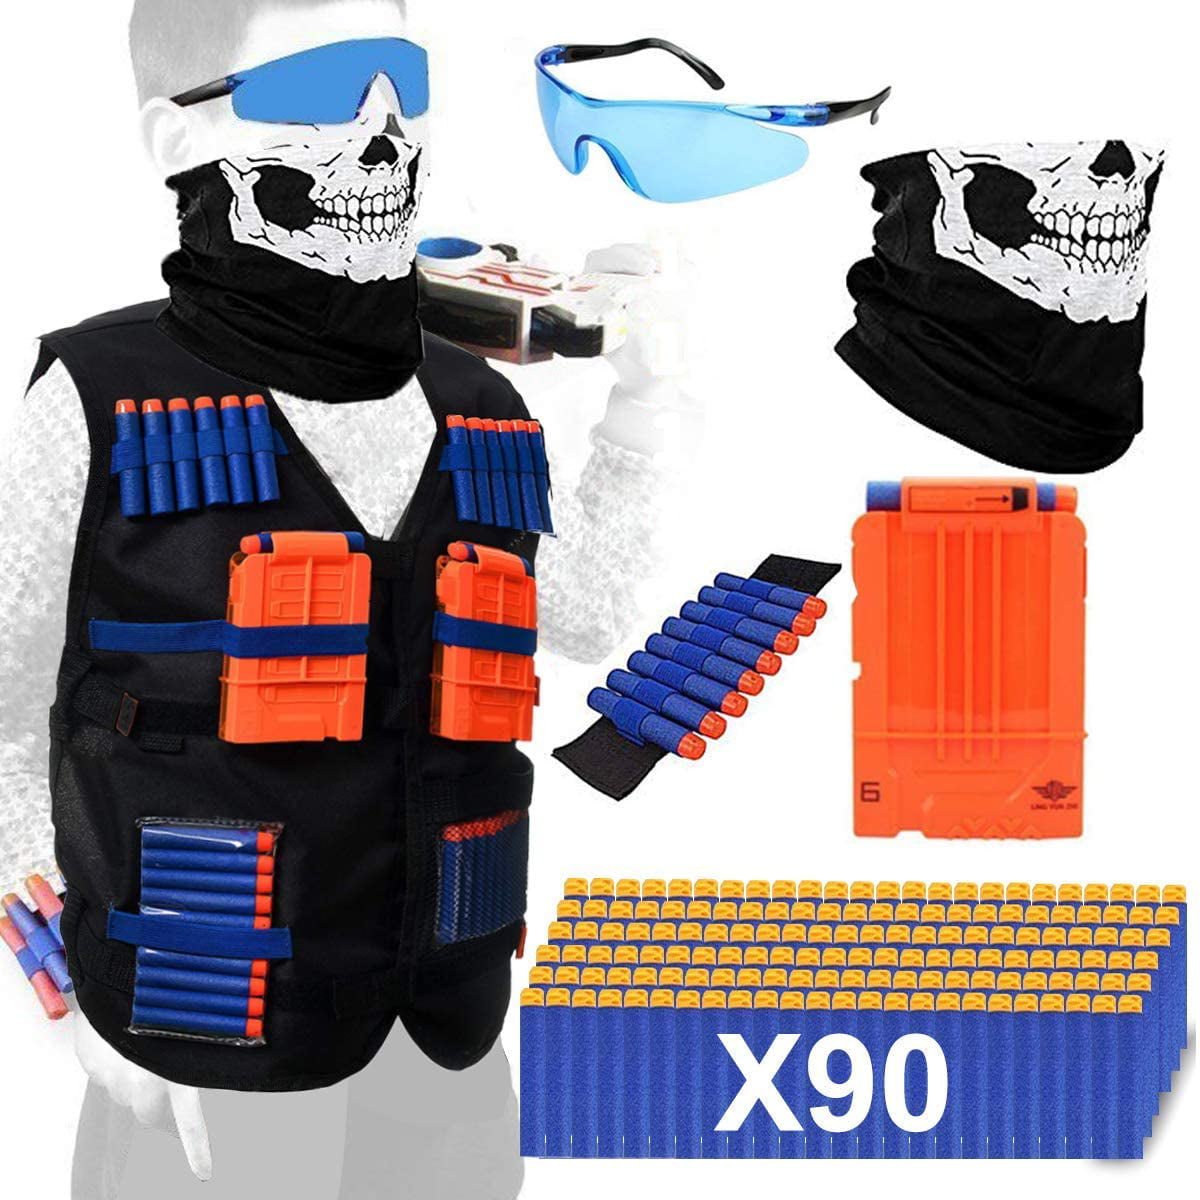 All in One Nerf Tactical Vest Guns War Game Kit W/ Foam Darts Mask and Glasses 